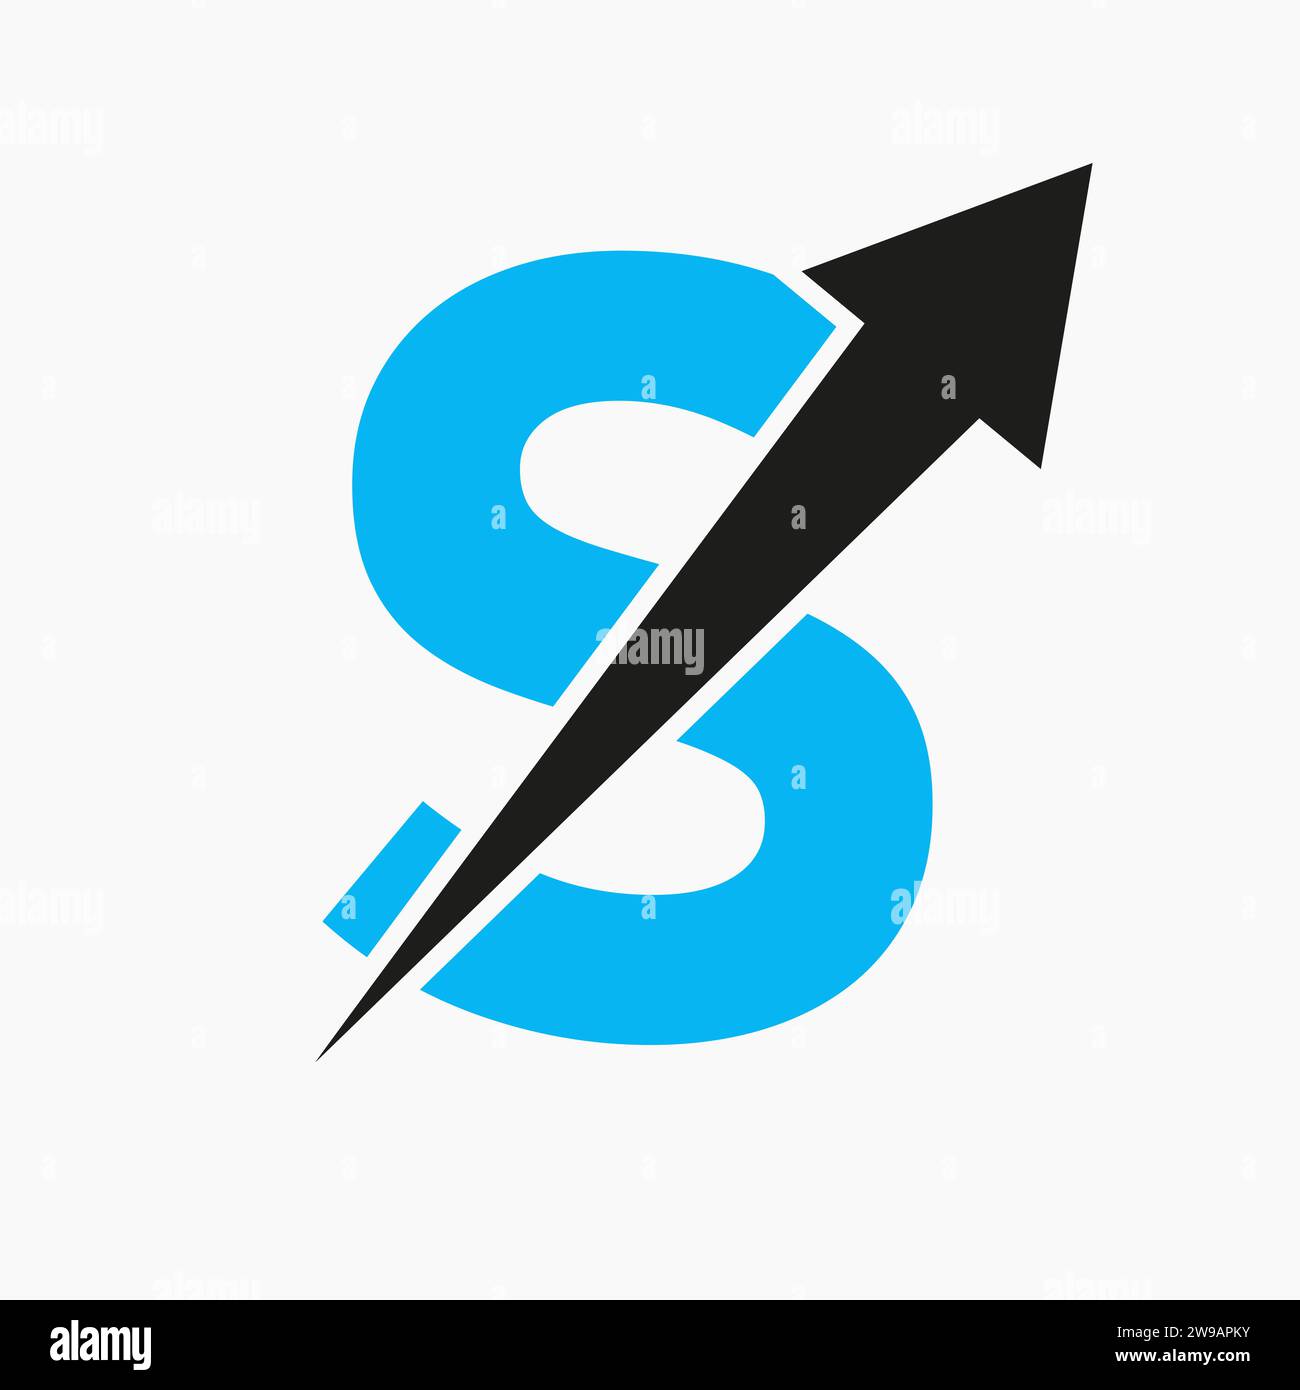 Initial Financial Logo On Letter S Concept With Growth Arrow Icon Stock Vector